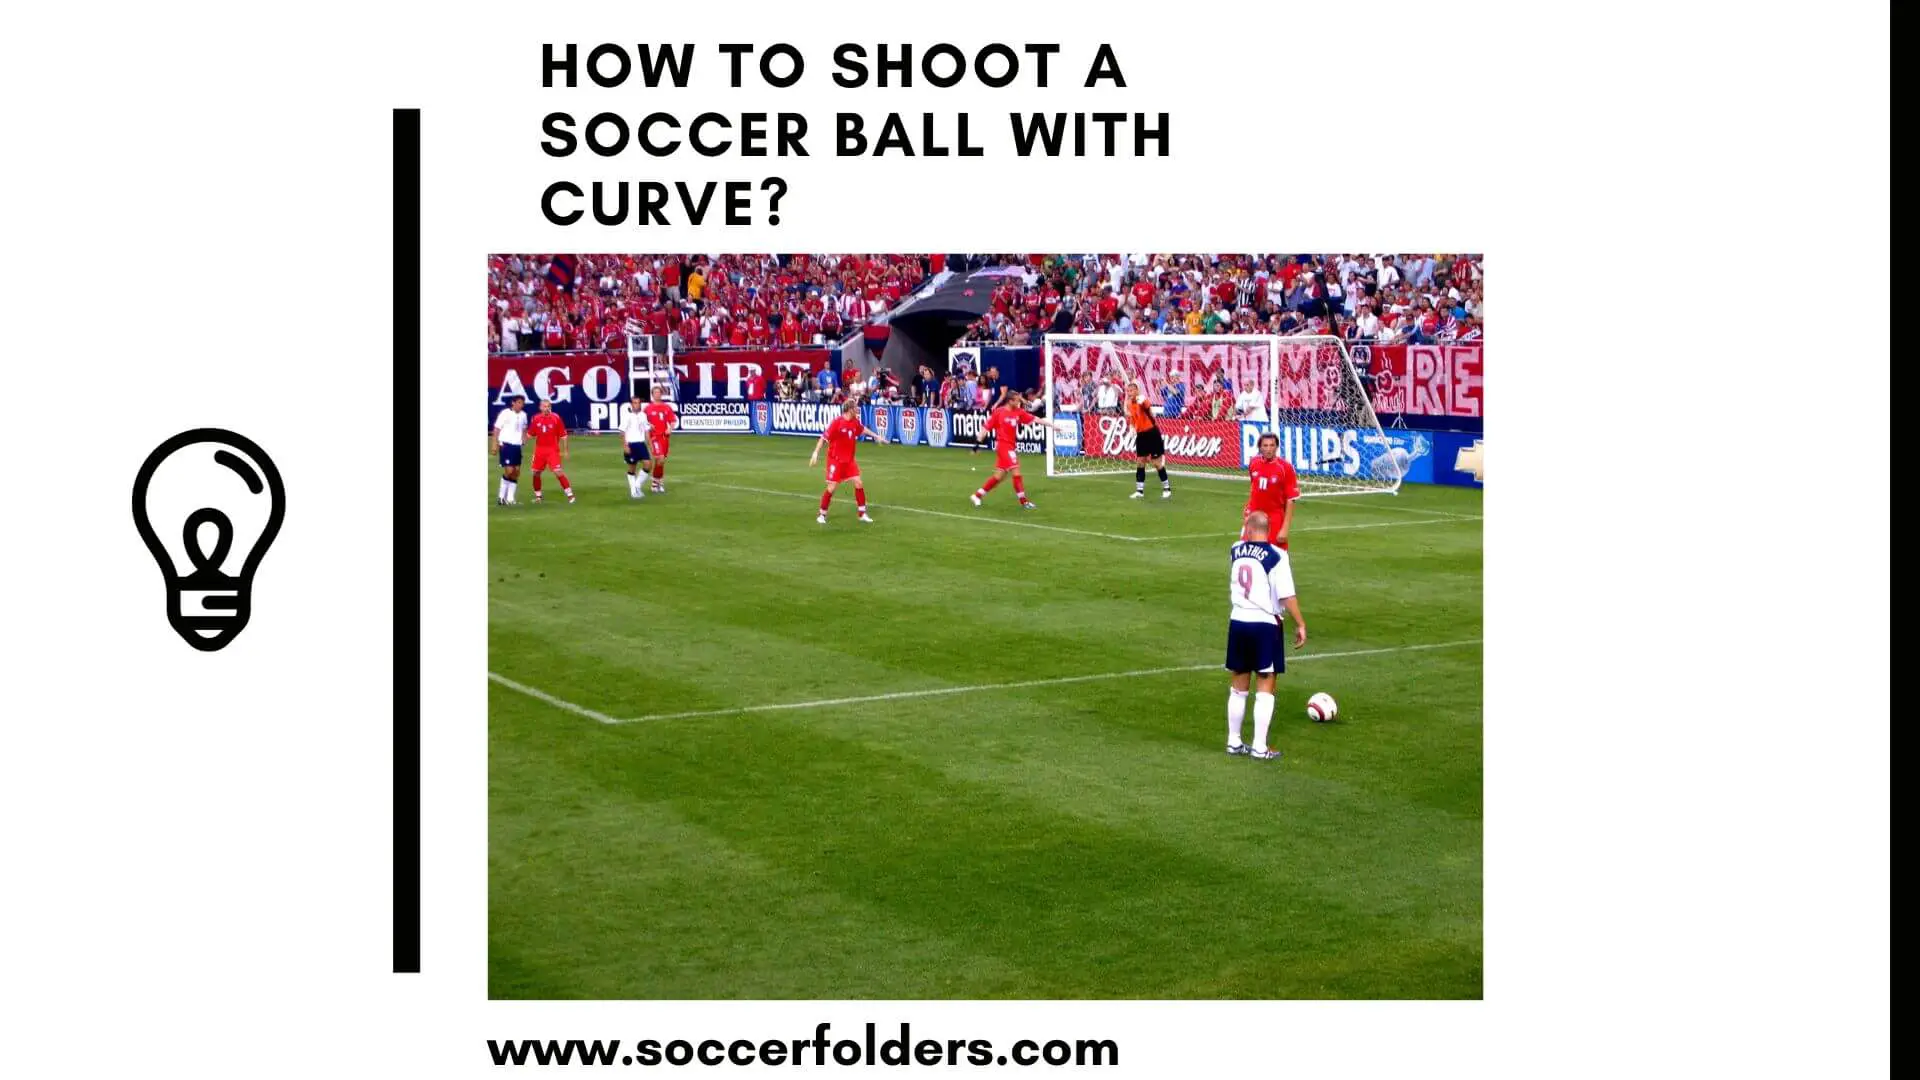 How to shoot a soccer ball with curve - Featured image